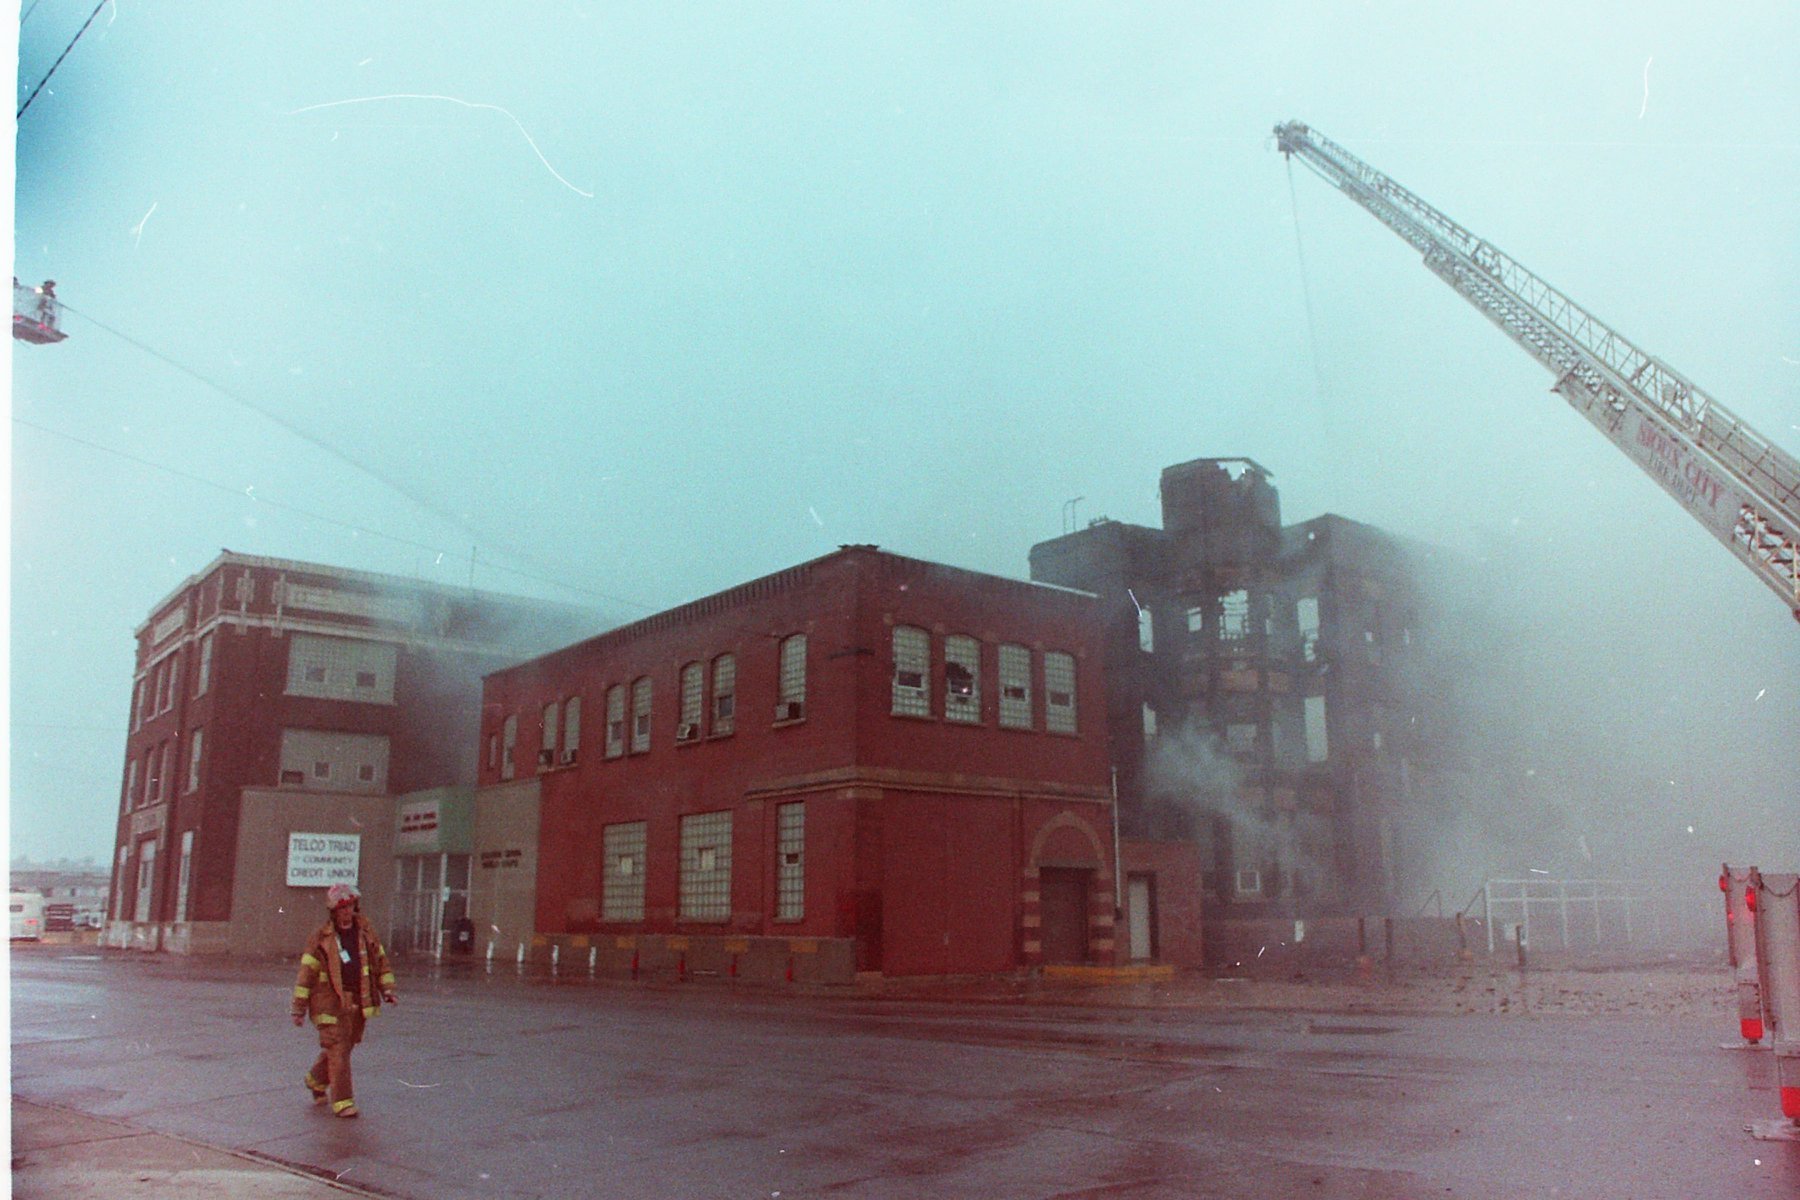 On this day in Sioux City history: The Livestock Exchange Building was destroyed by fire on May 15, 1998. The Exchange had been the center of Sioux City&rsquo;s livestock industry since 1894. Construction of the original building, designed by William